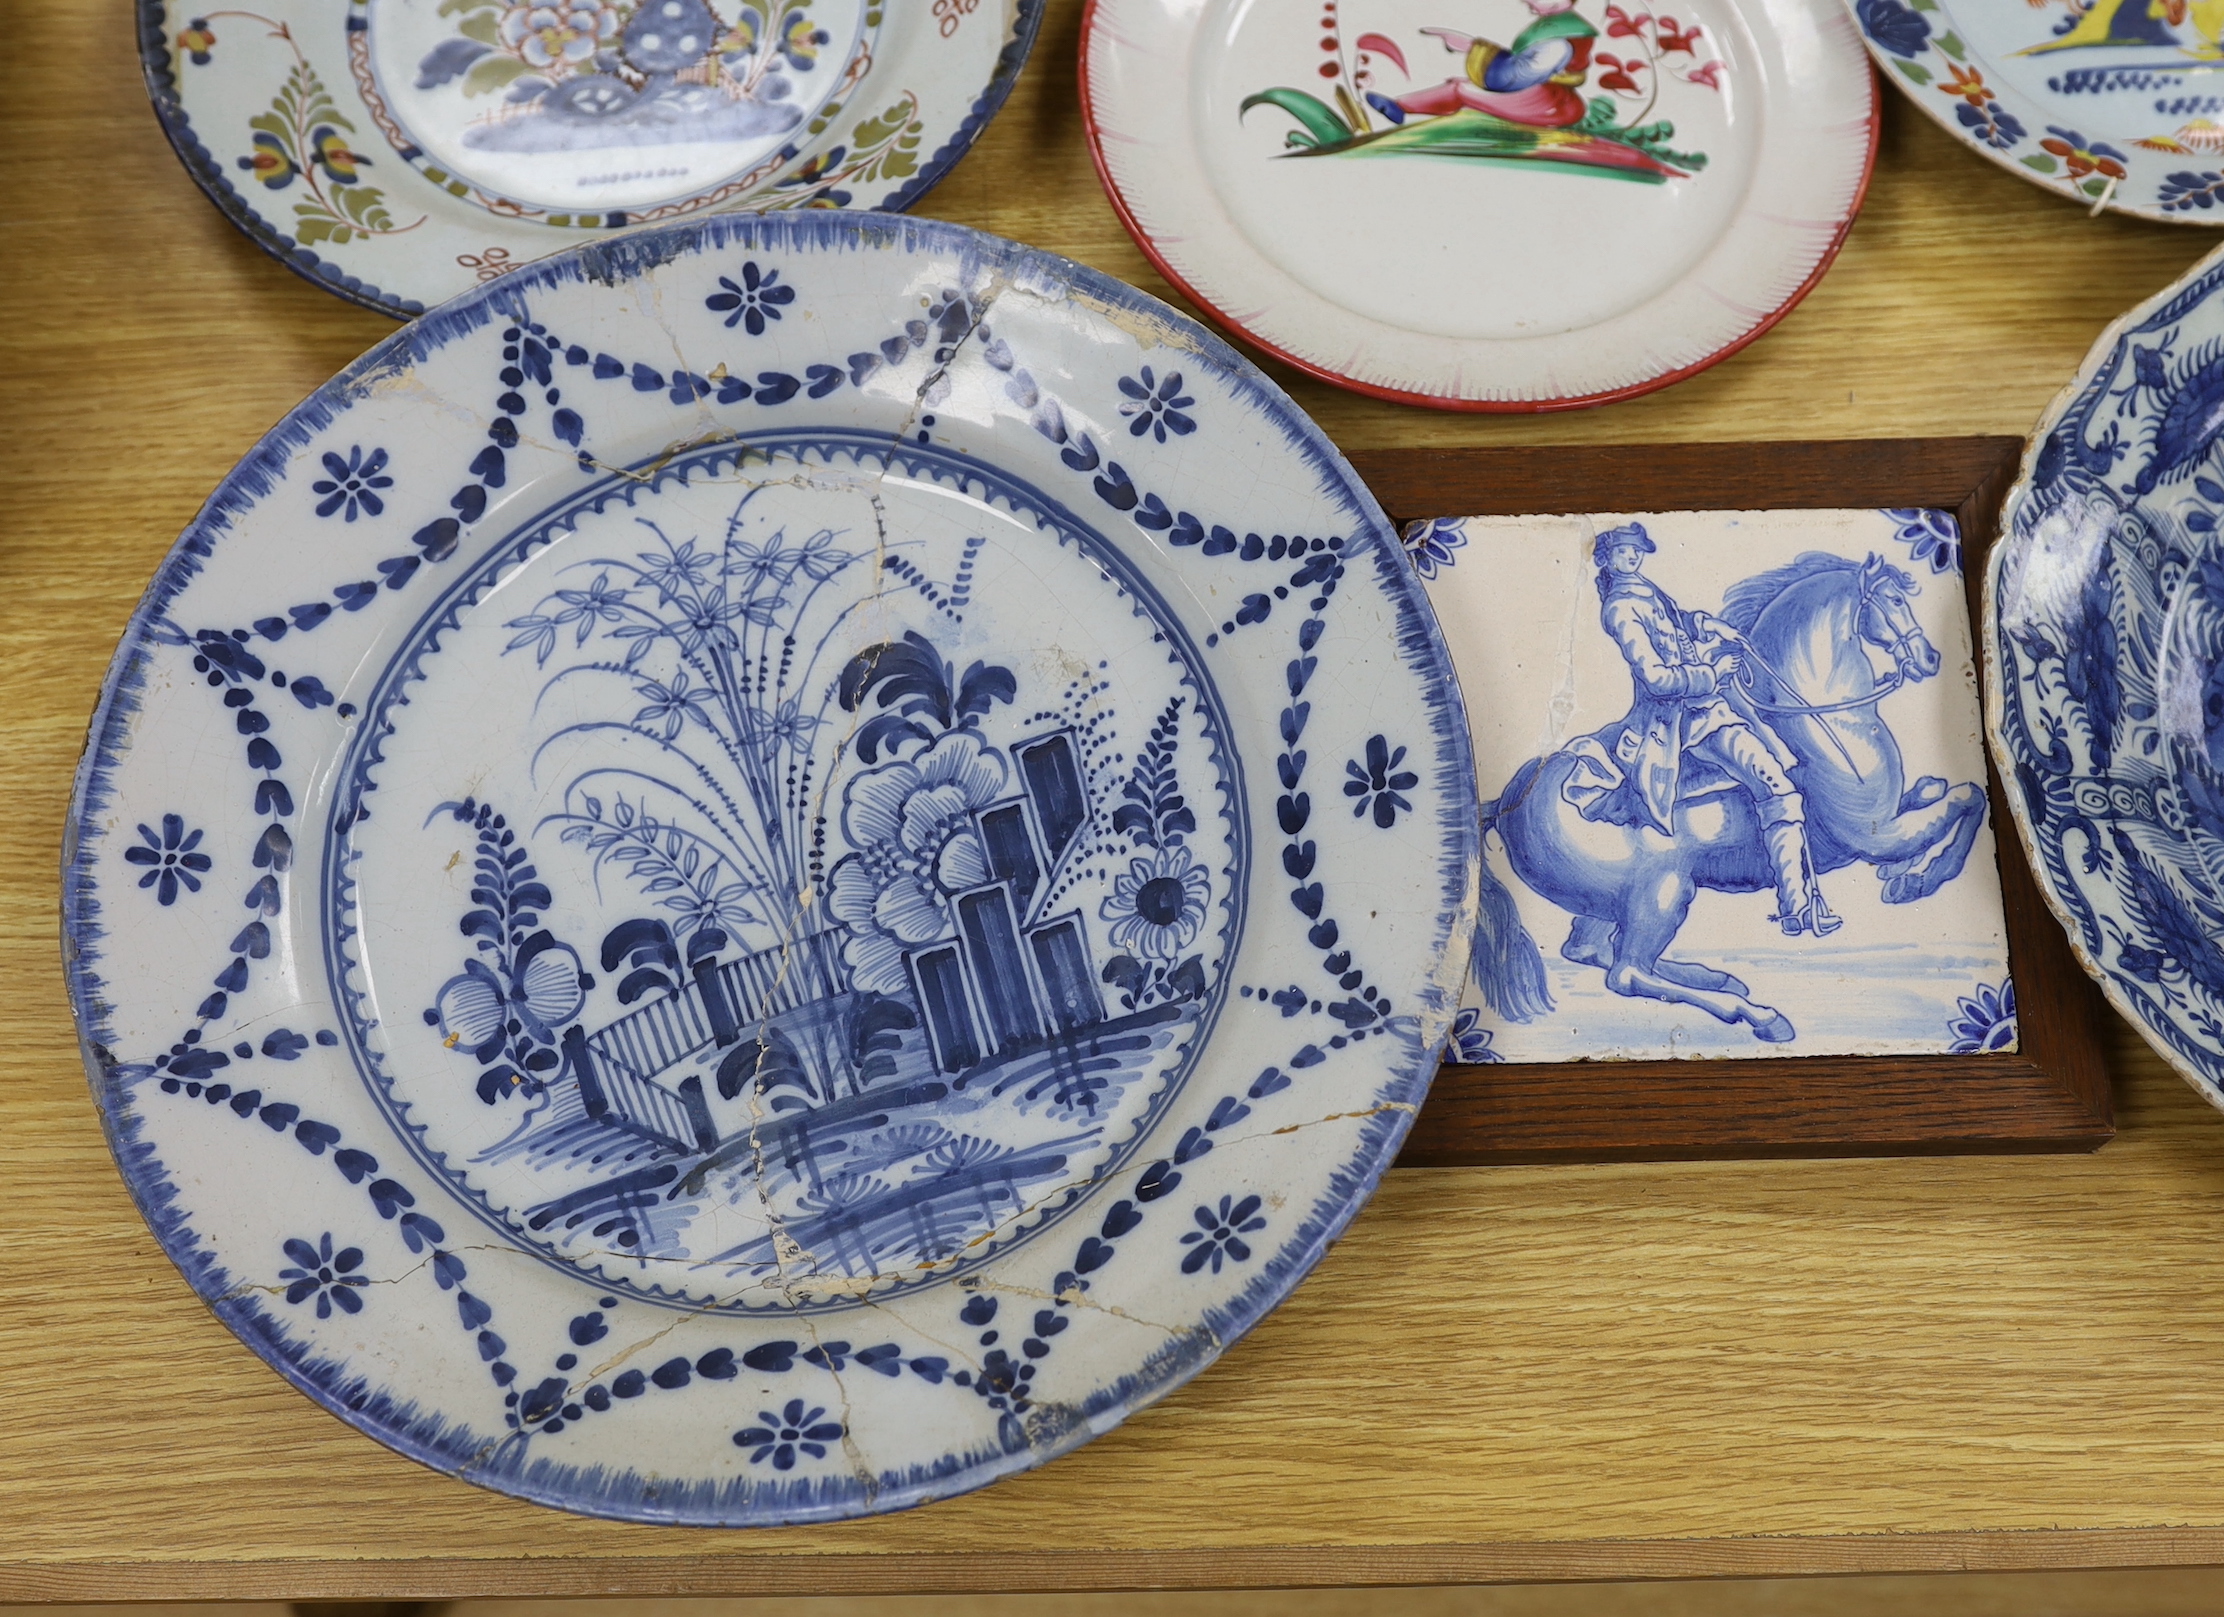 Two 18th century Delft blue and white dishes, a Delft polychrome dish, an English delftware plate, a - Image 3 of 4